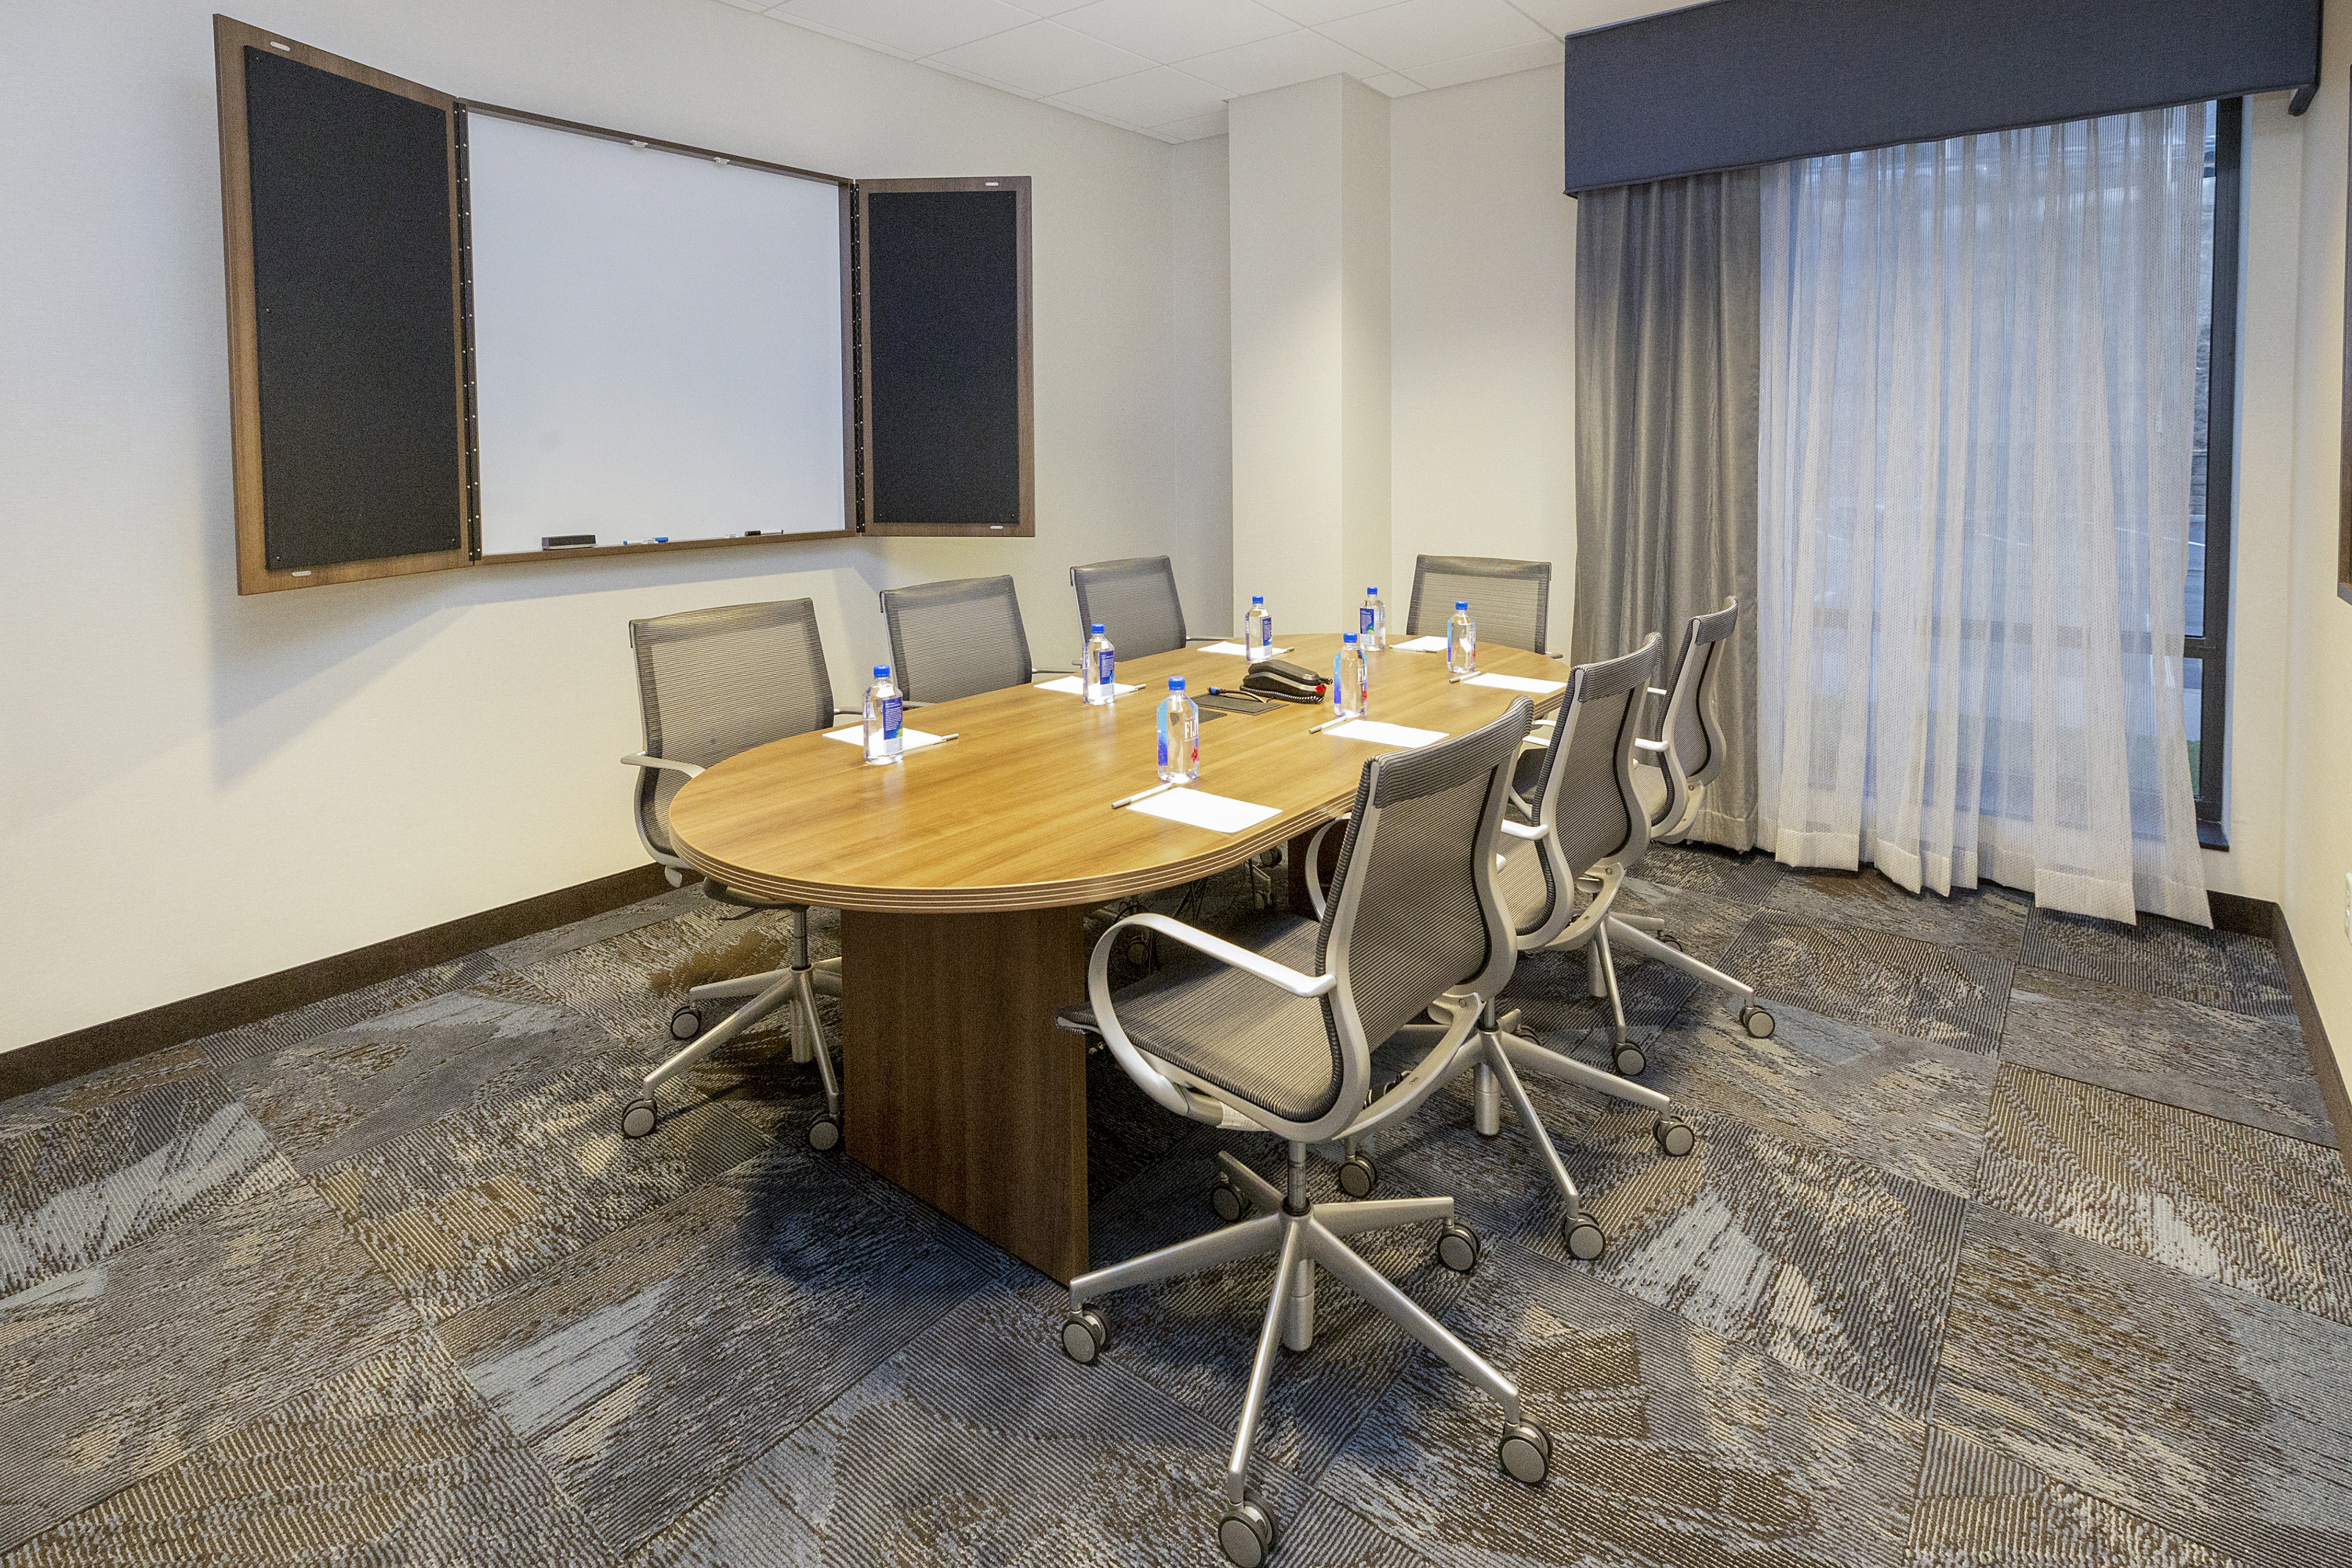 Boardroom with Meeting Table, Office Chairs and Whiteboard